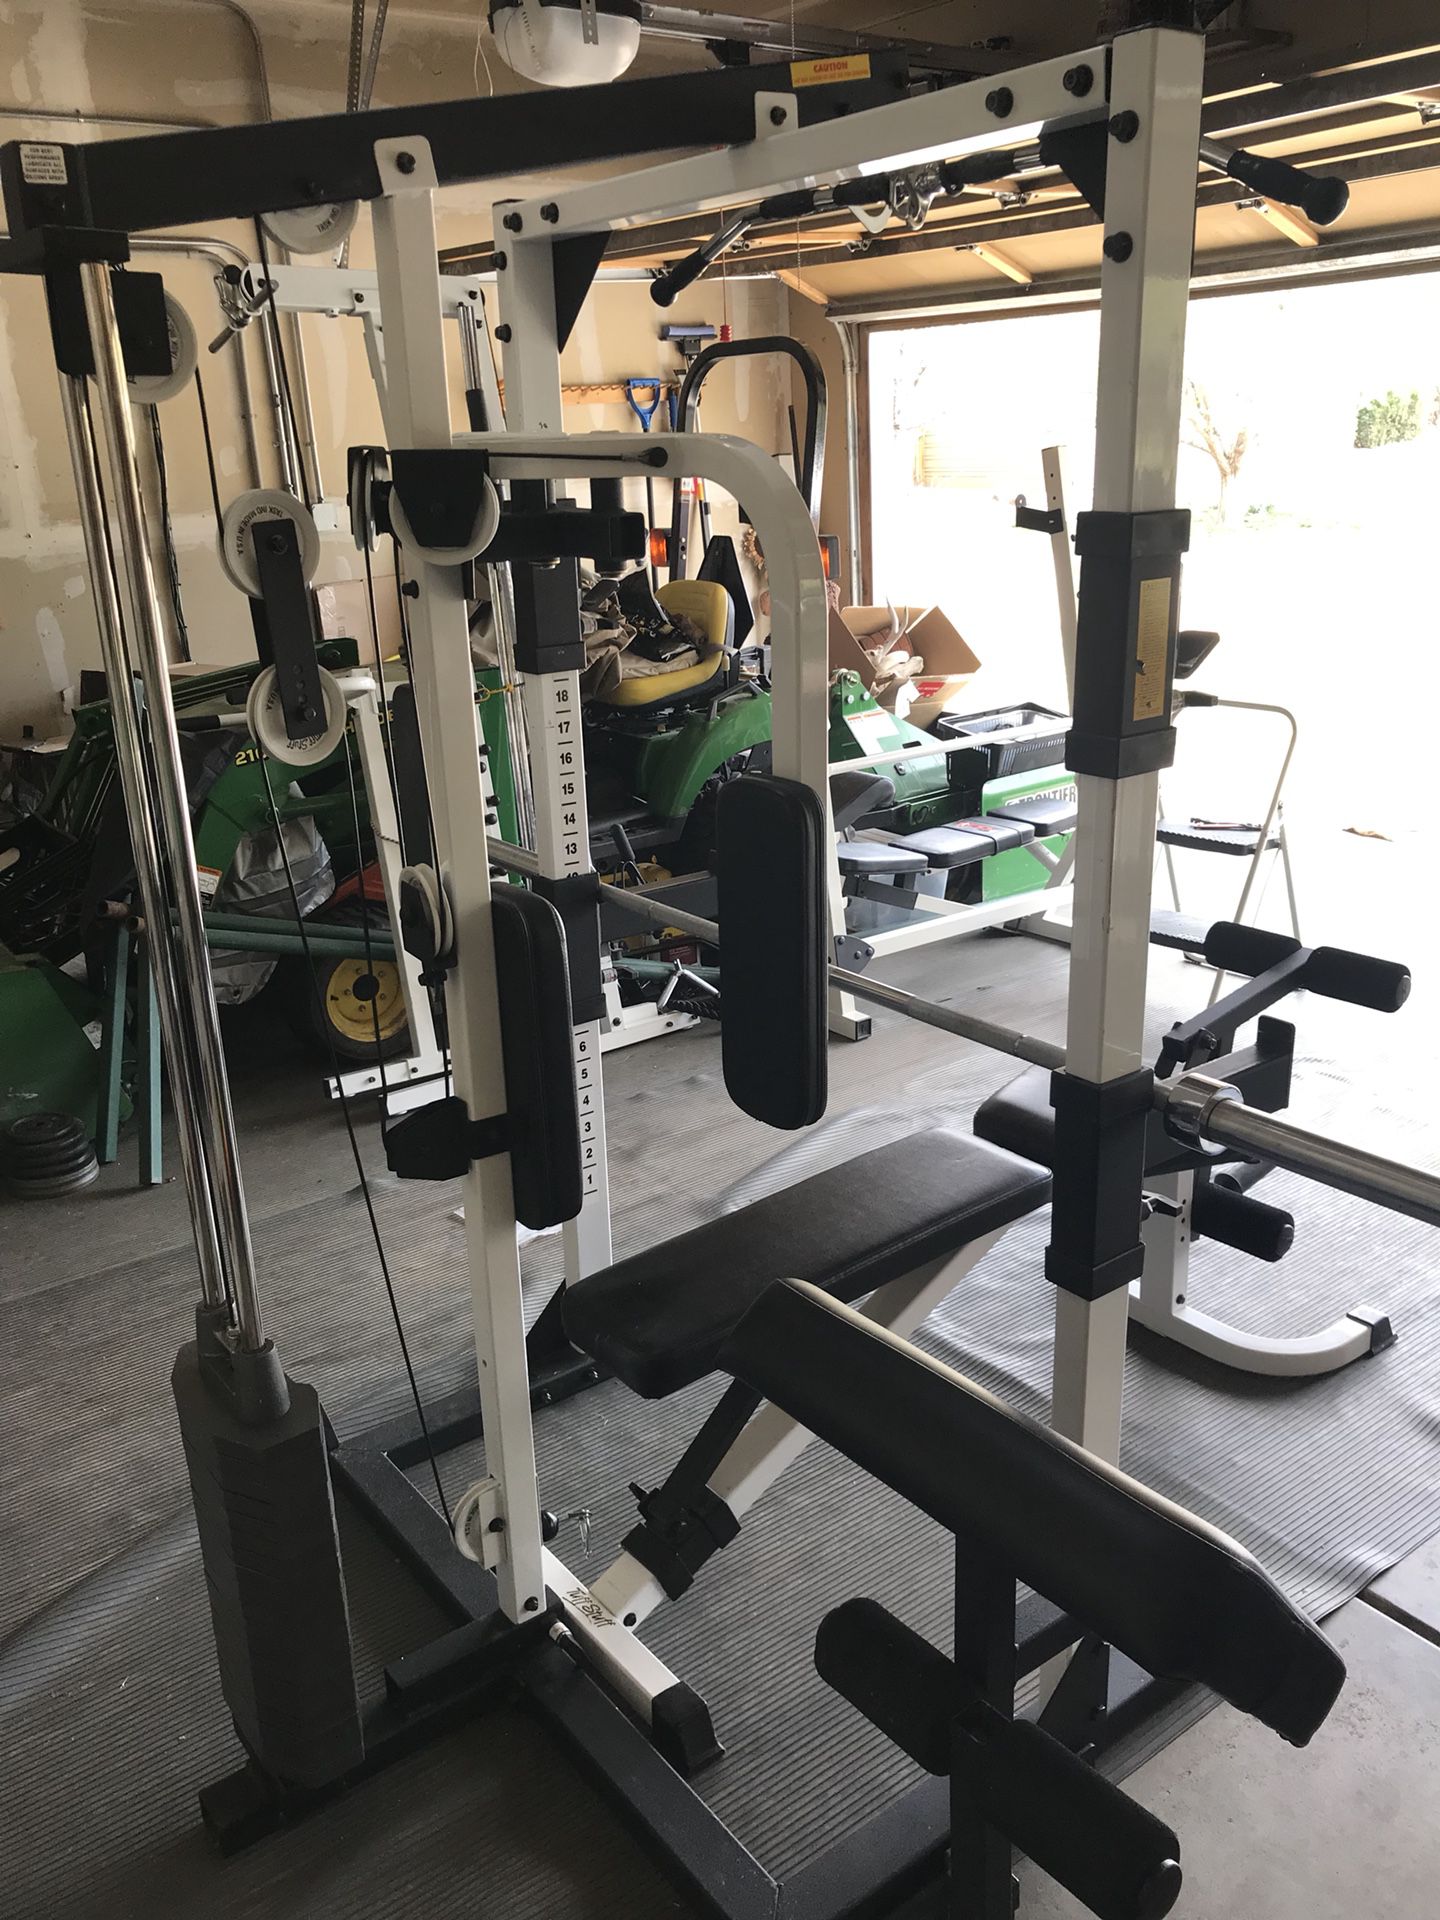 Tuff Stuff - THD 345 w/ Bench & all attachments for 175$ : r/homegym